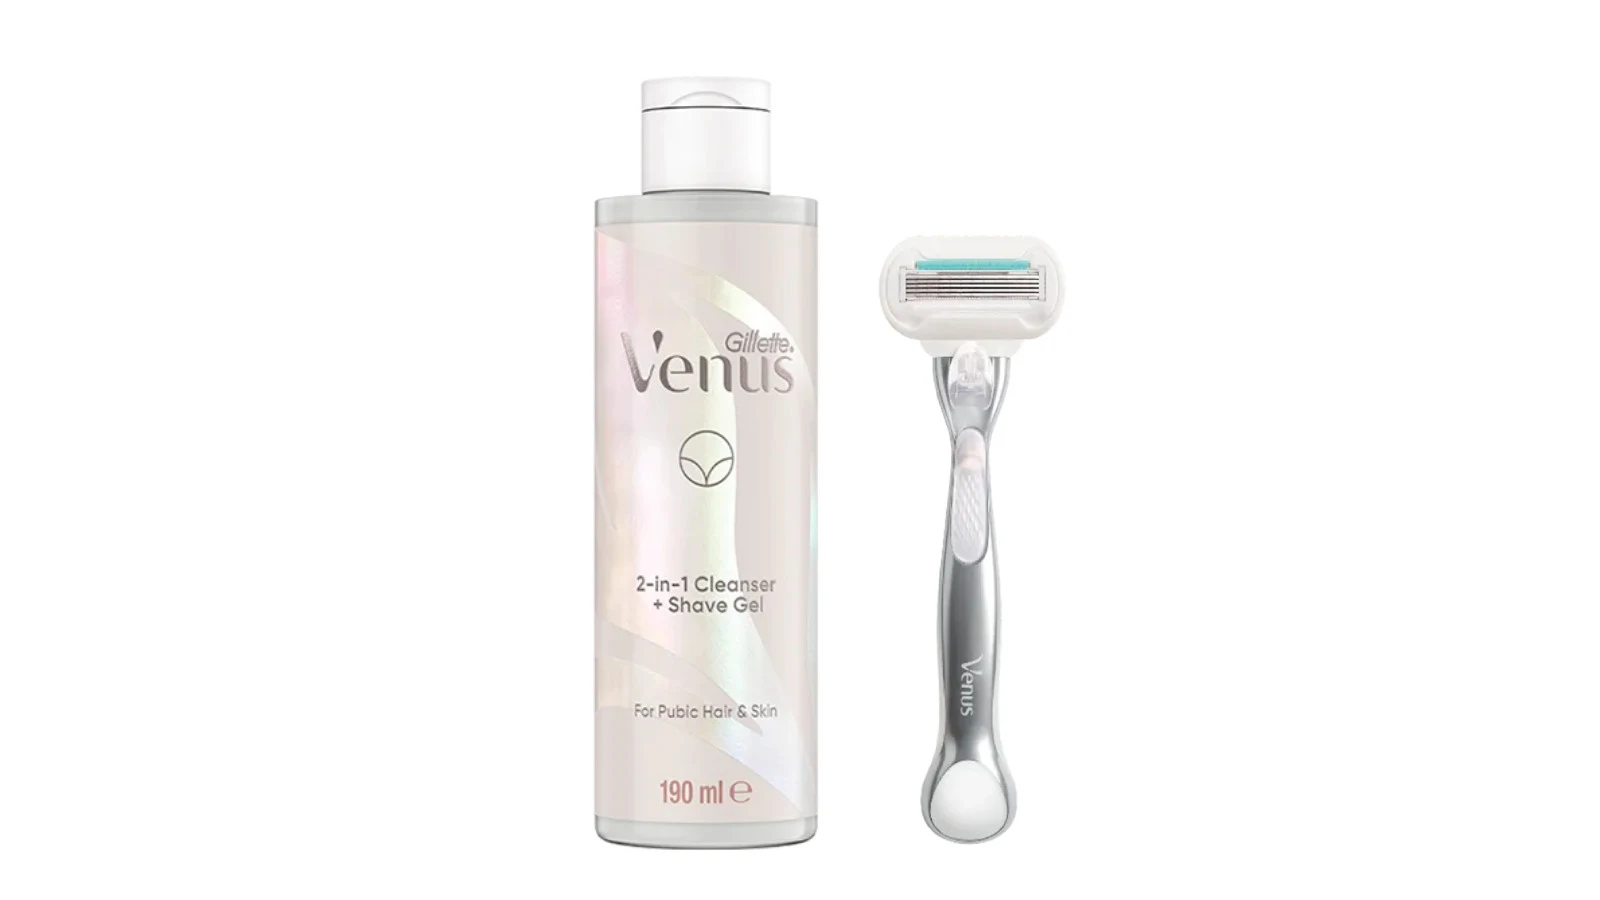 Venus 2 in 1 Cleanser and Shave Gel and Venus Deluxe Smooth razor